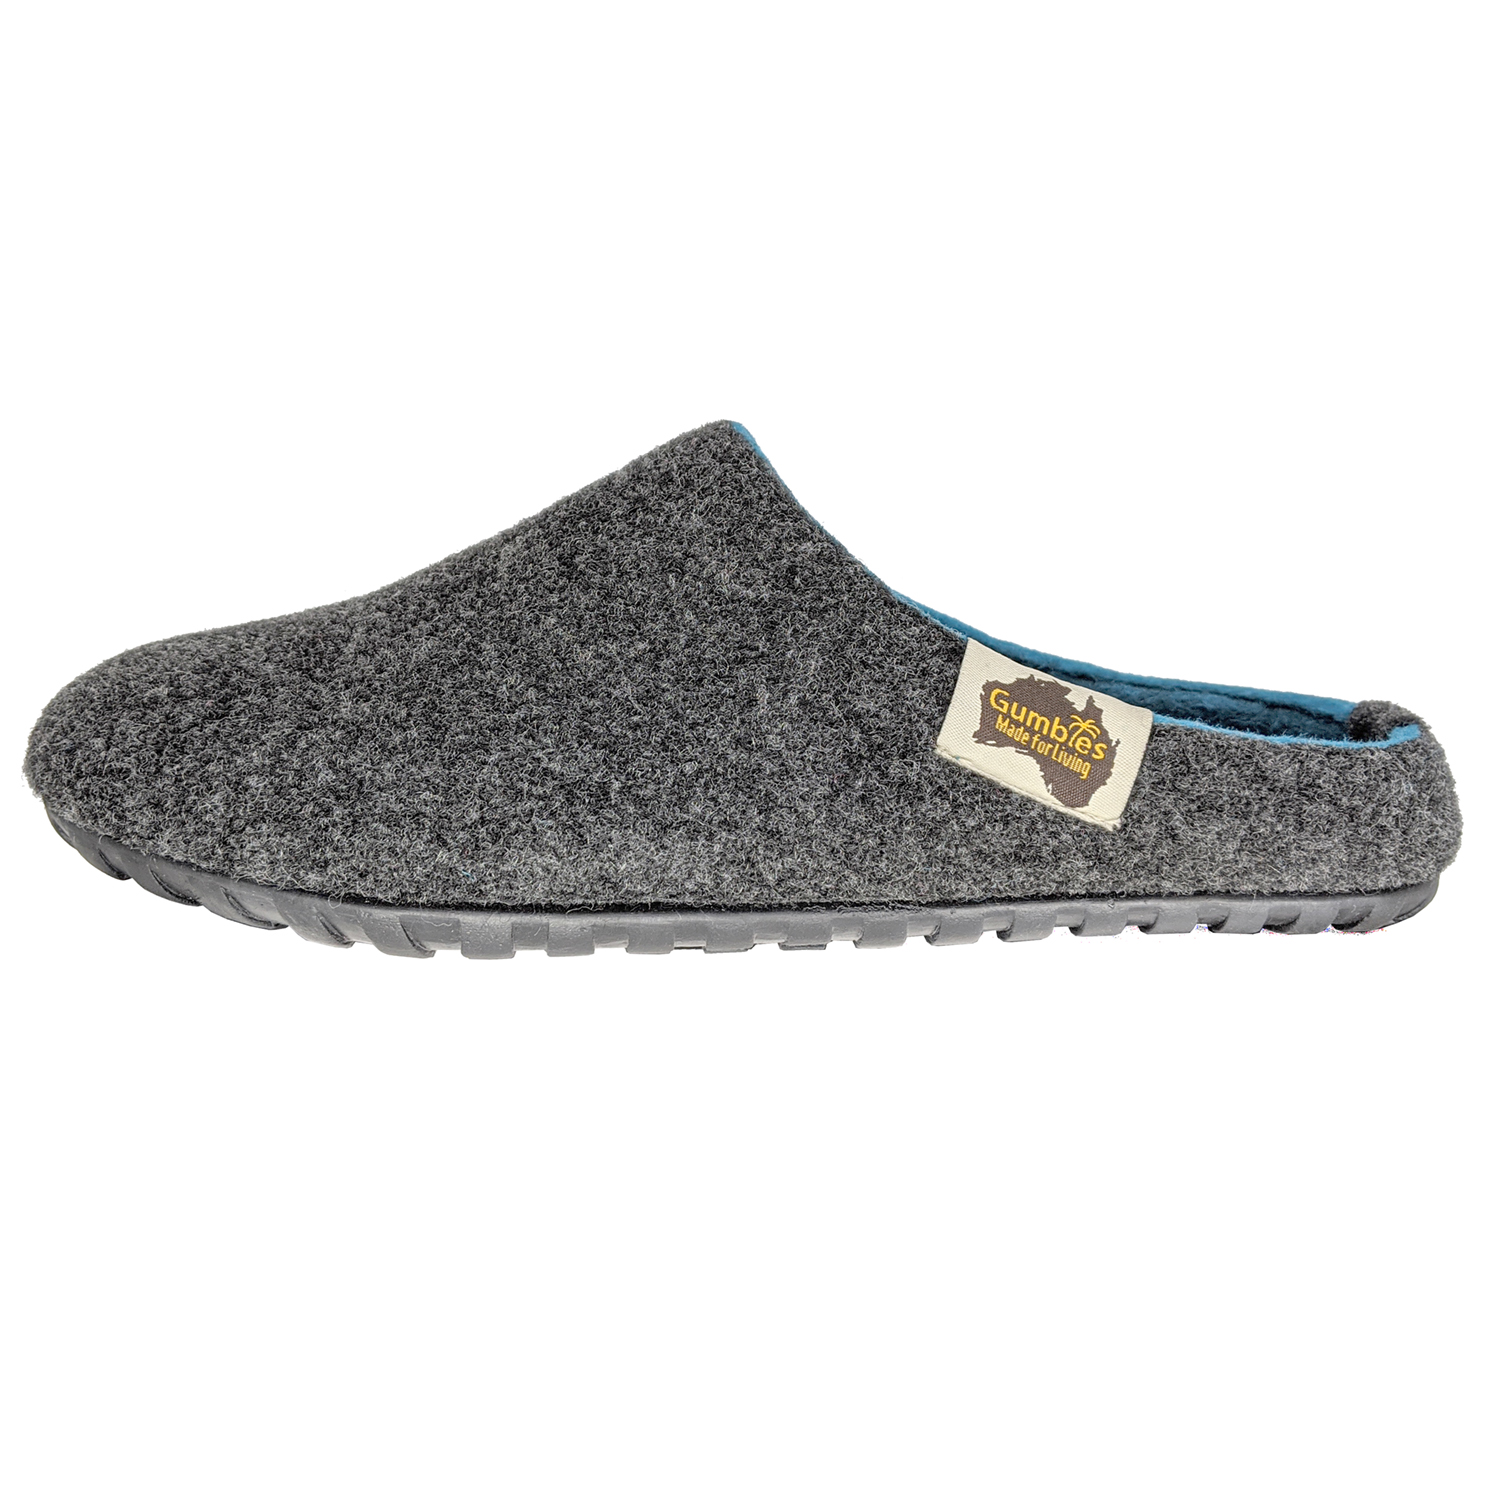 Gumbies Outback Hausschuh Charcoal-Turquoise